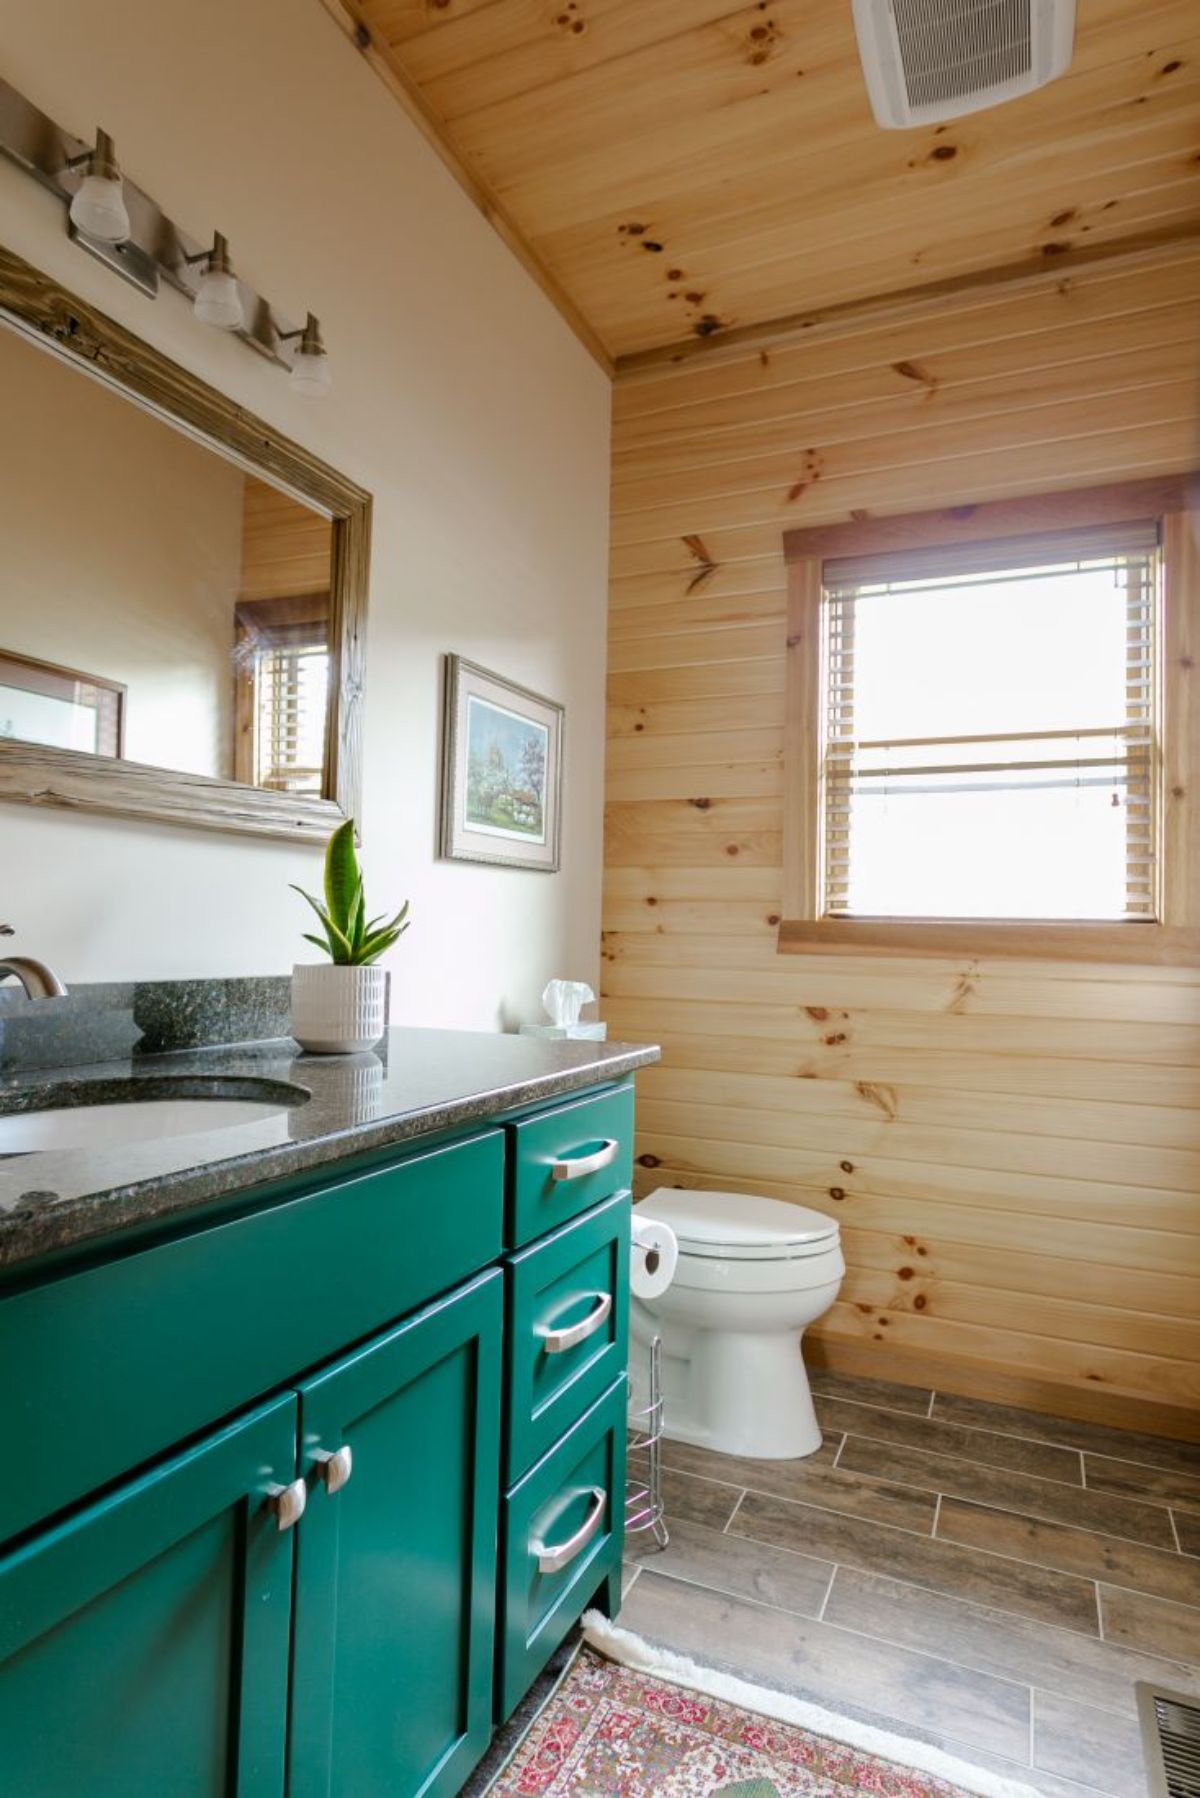 bright teal vanity with gray counters and white sink next to white toilet in bathroom with light wood walls